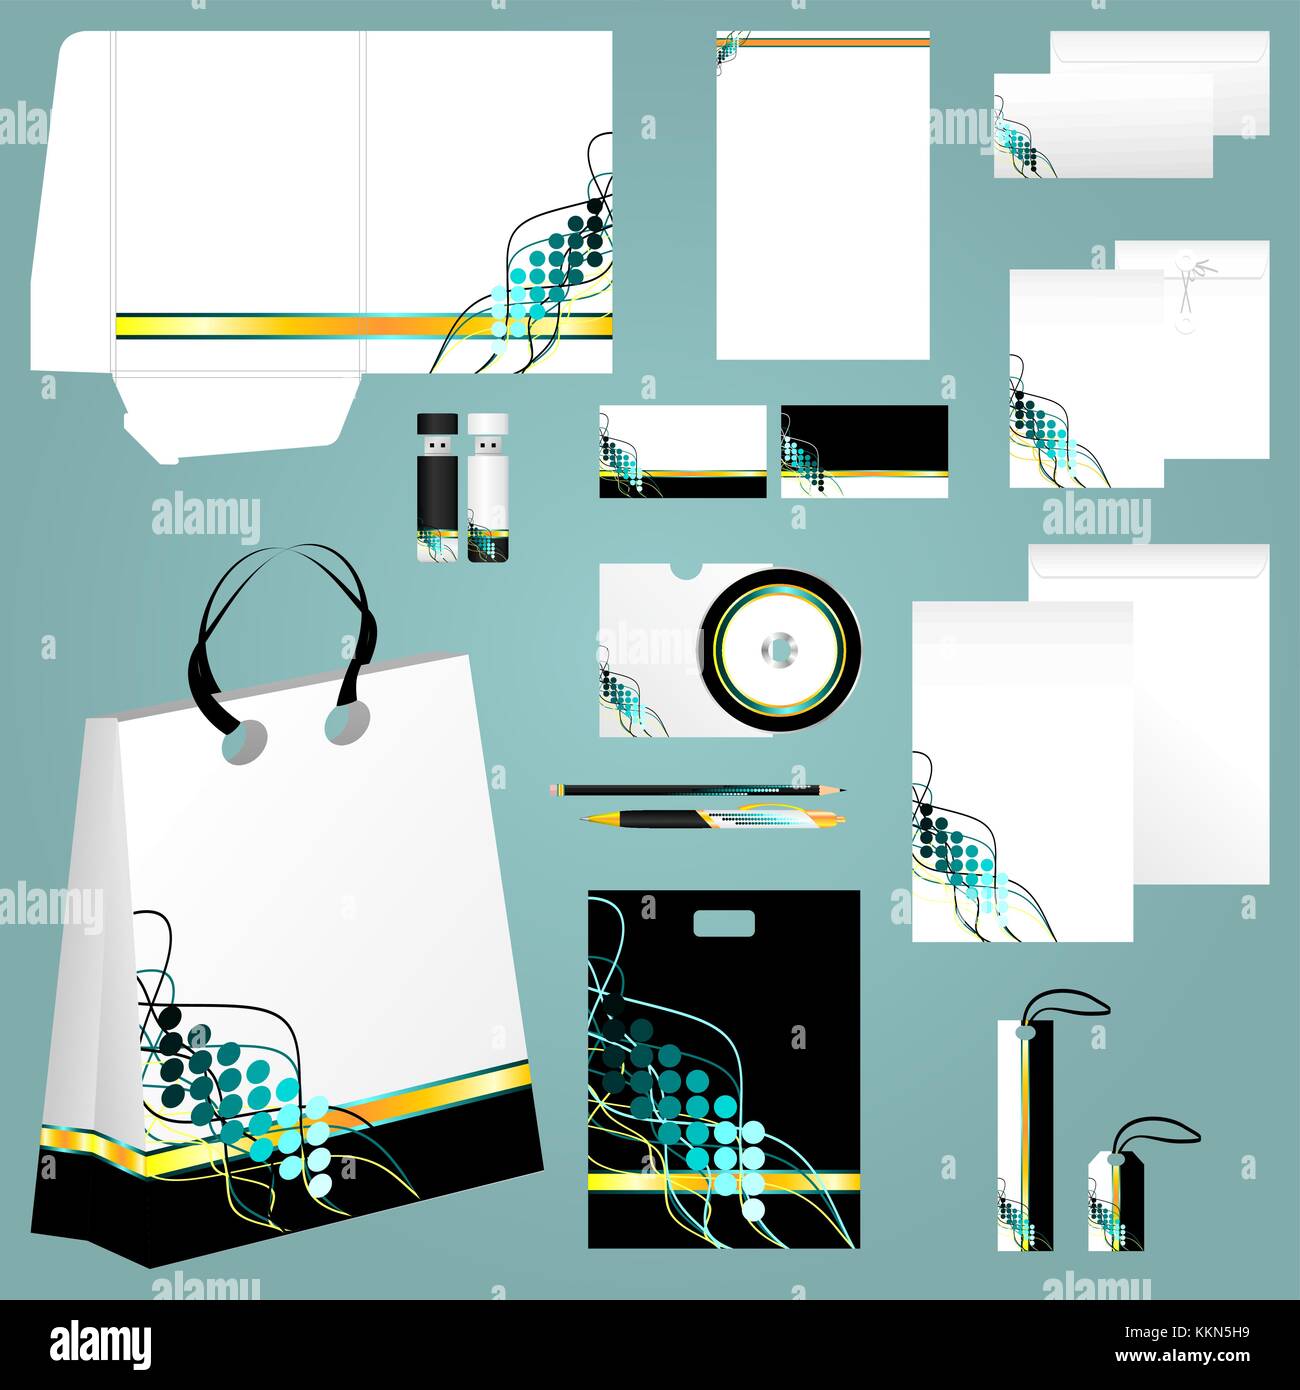 Stationery design in green, black and gold Stock Vector